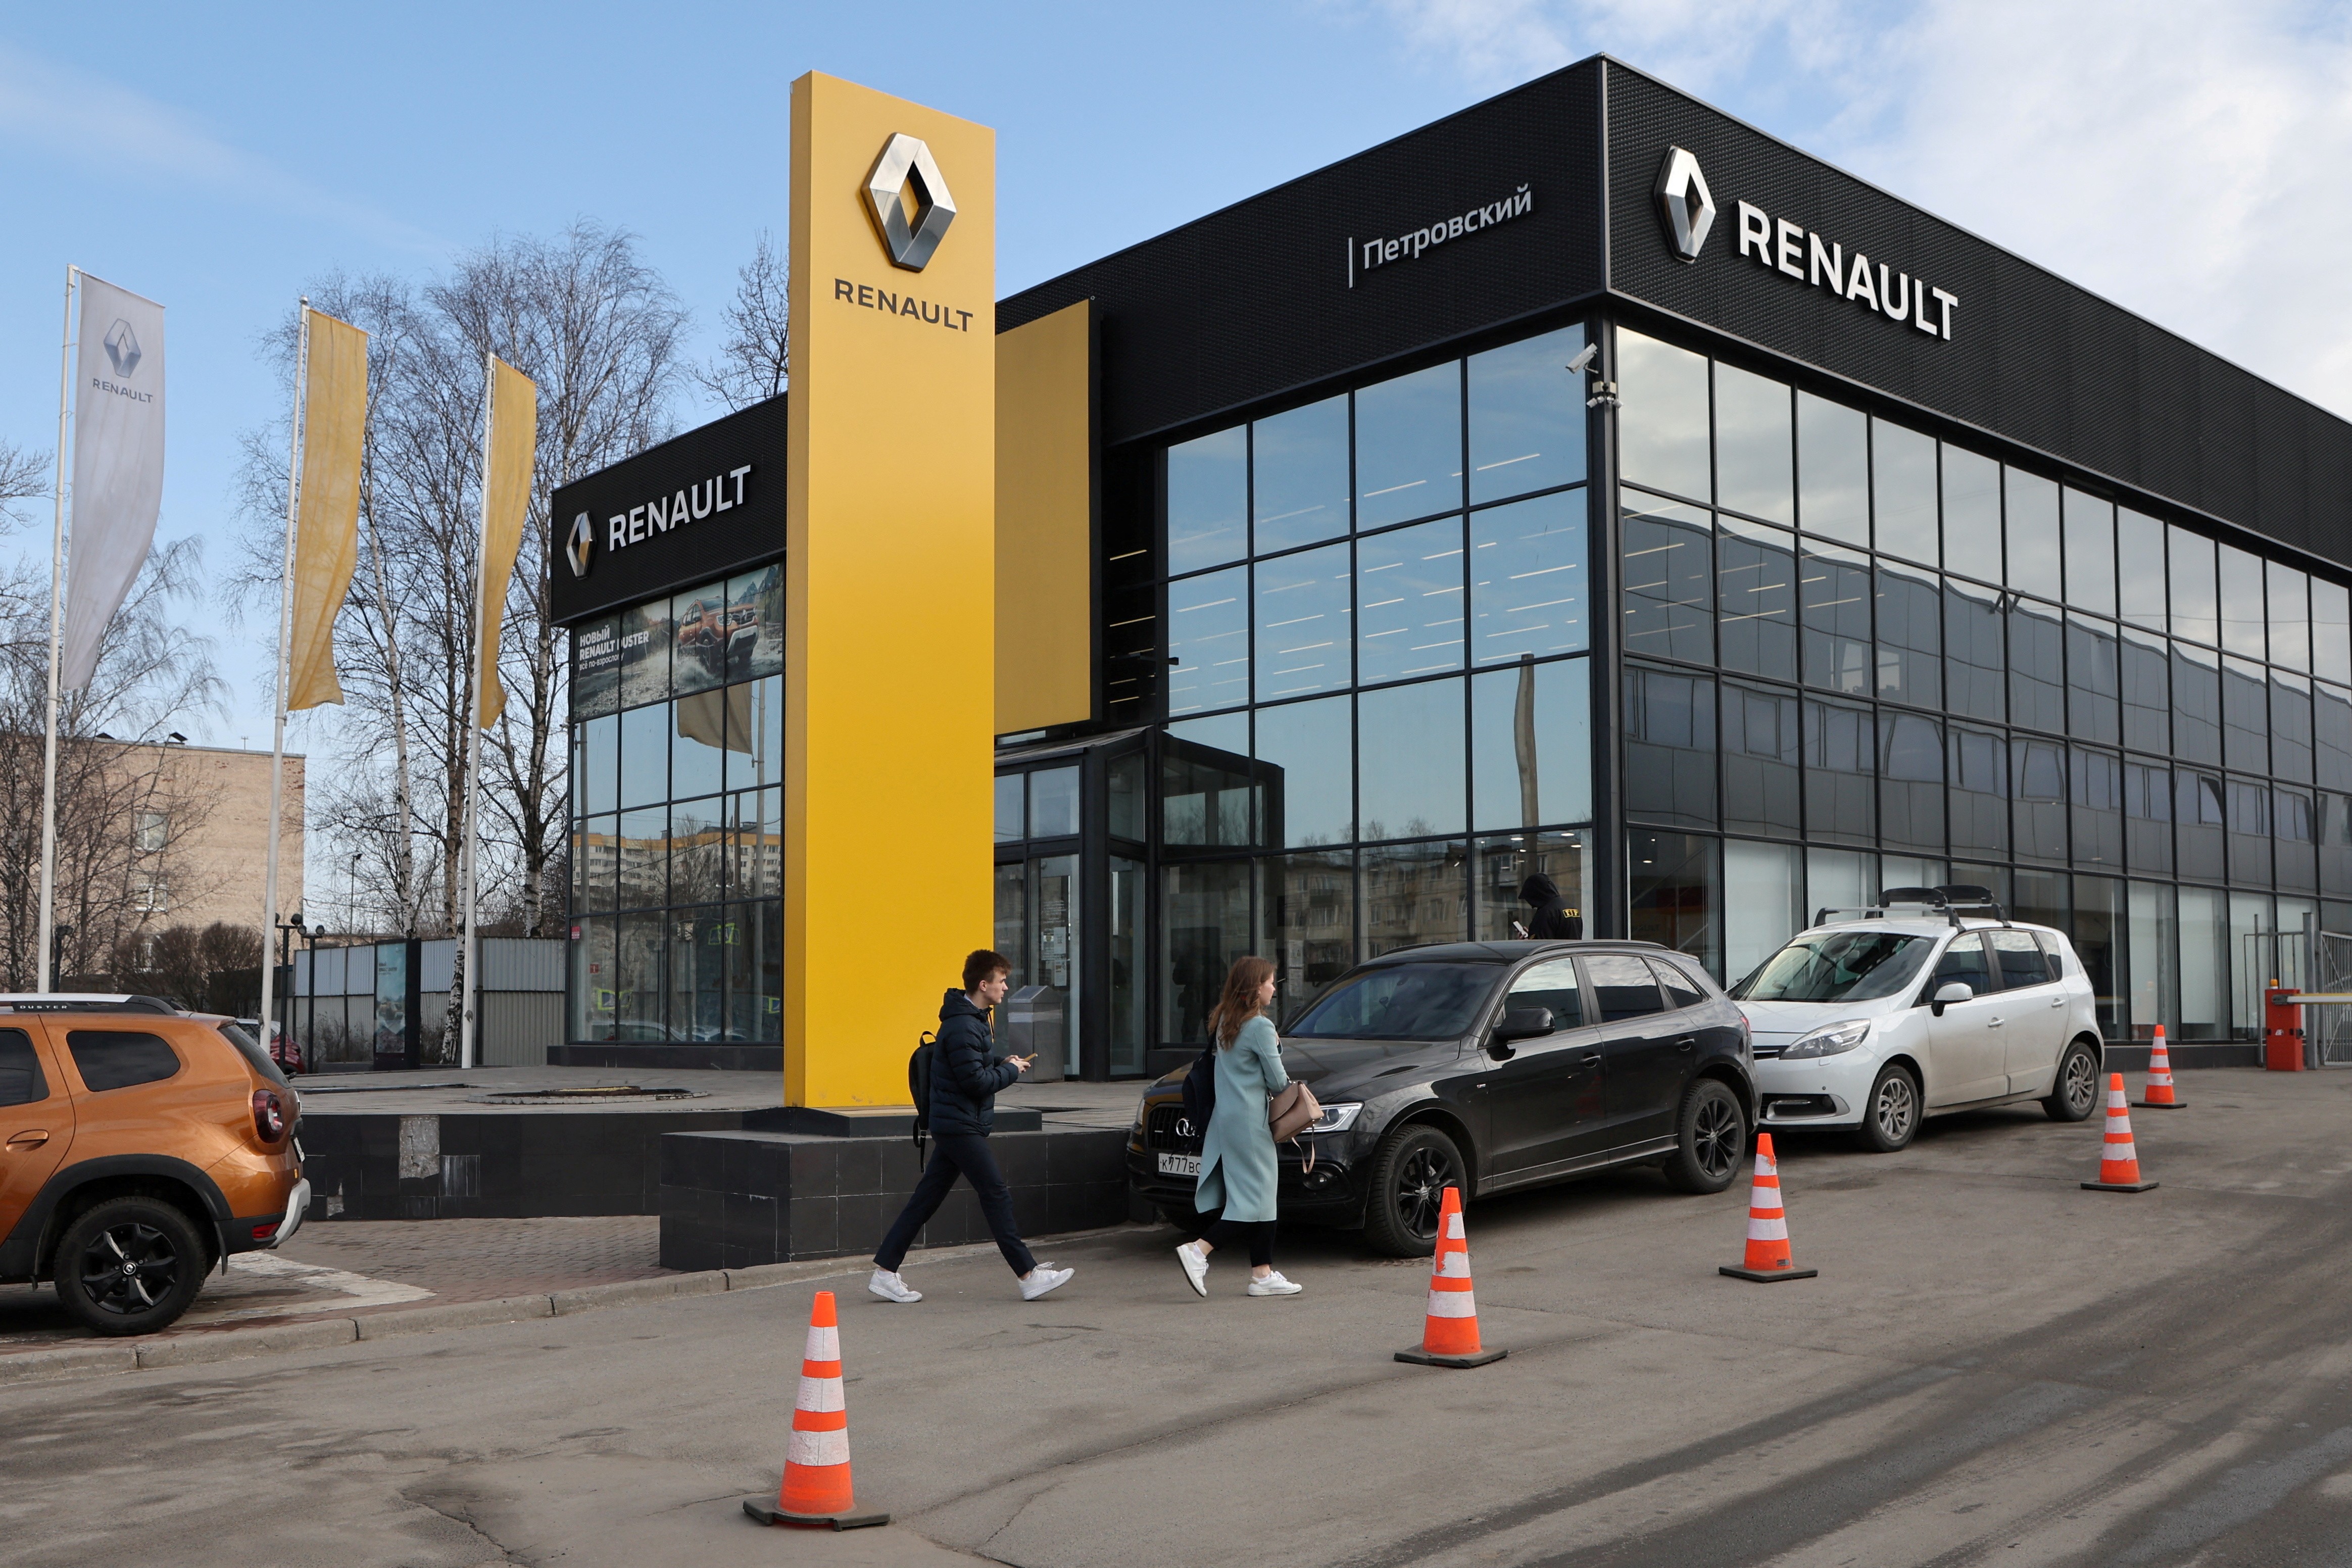 A view shows a Renault car showroom in Saint Petersburg